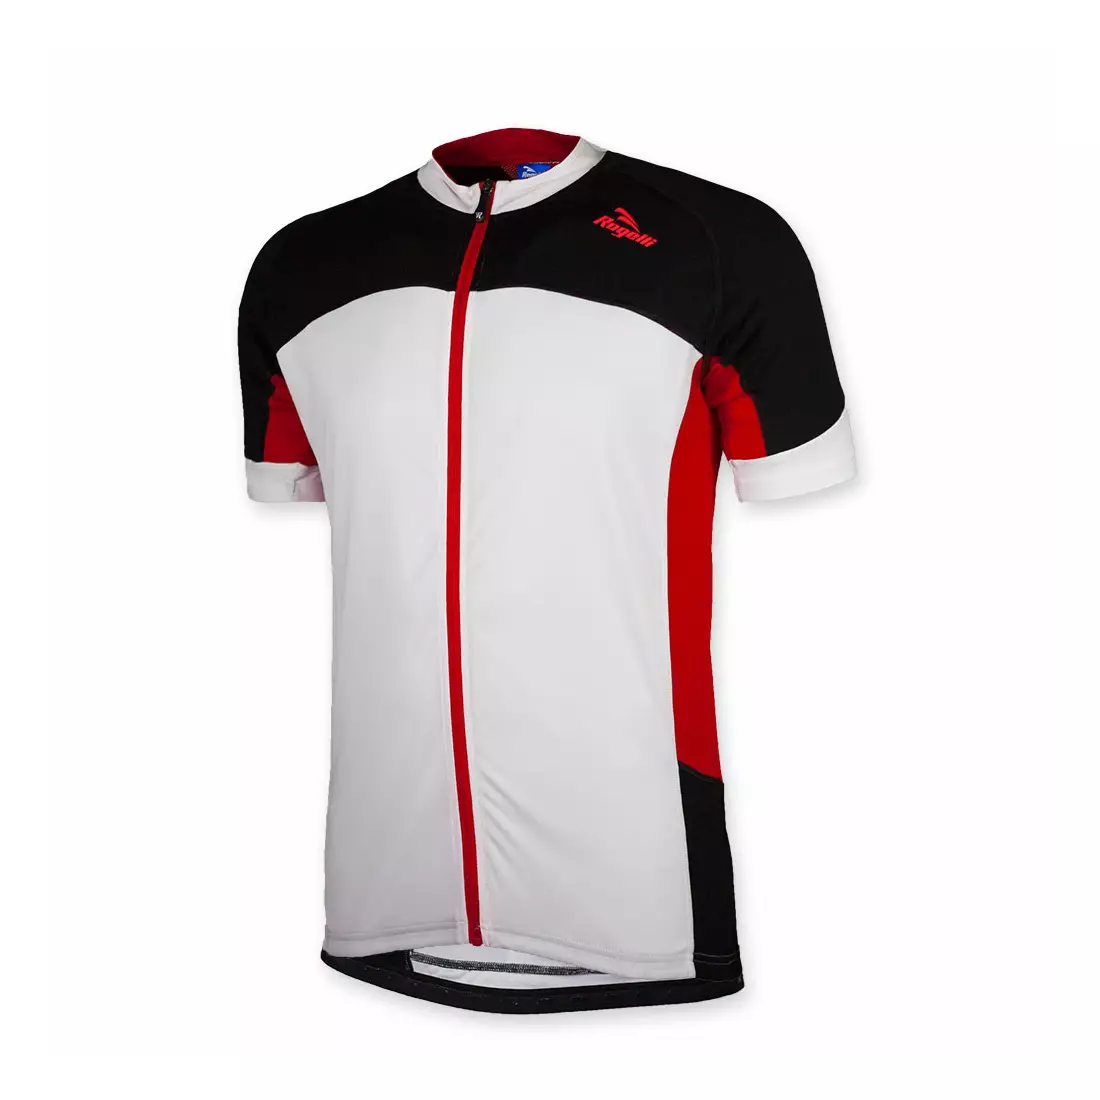 ROGELLI RECCO men's cycling jersey, white and red